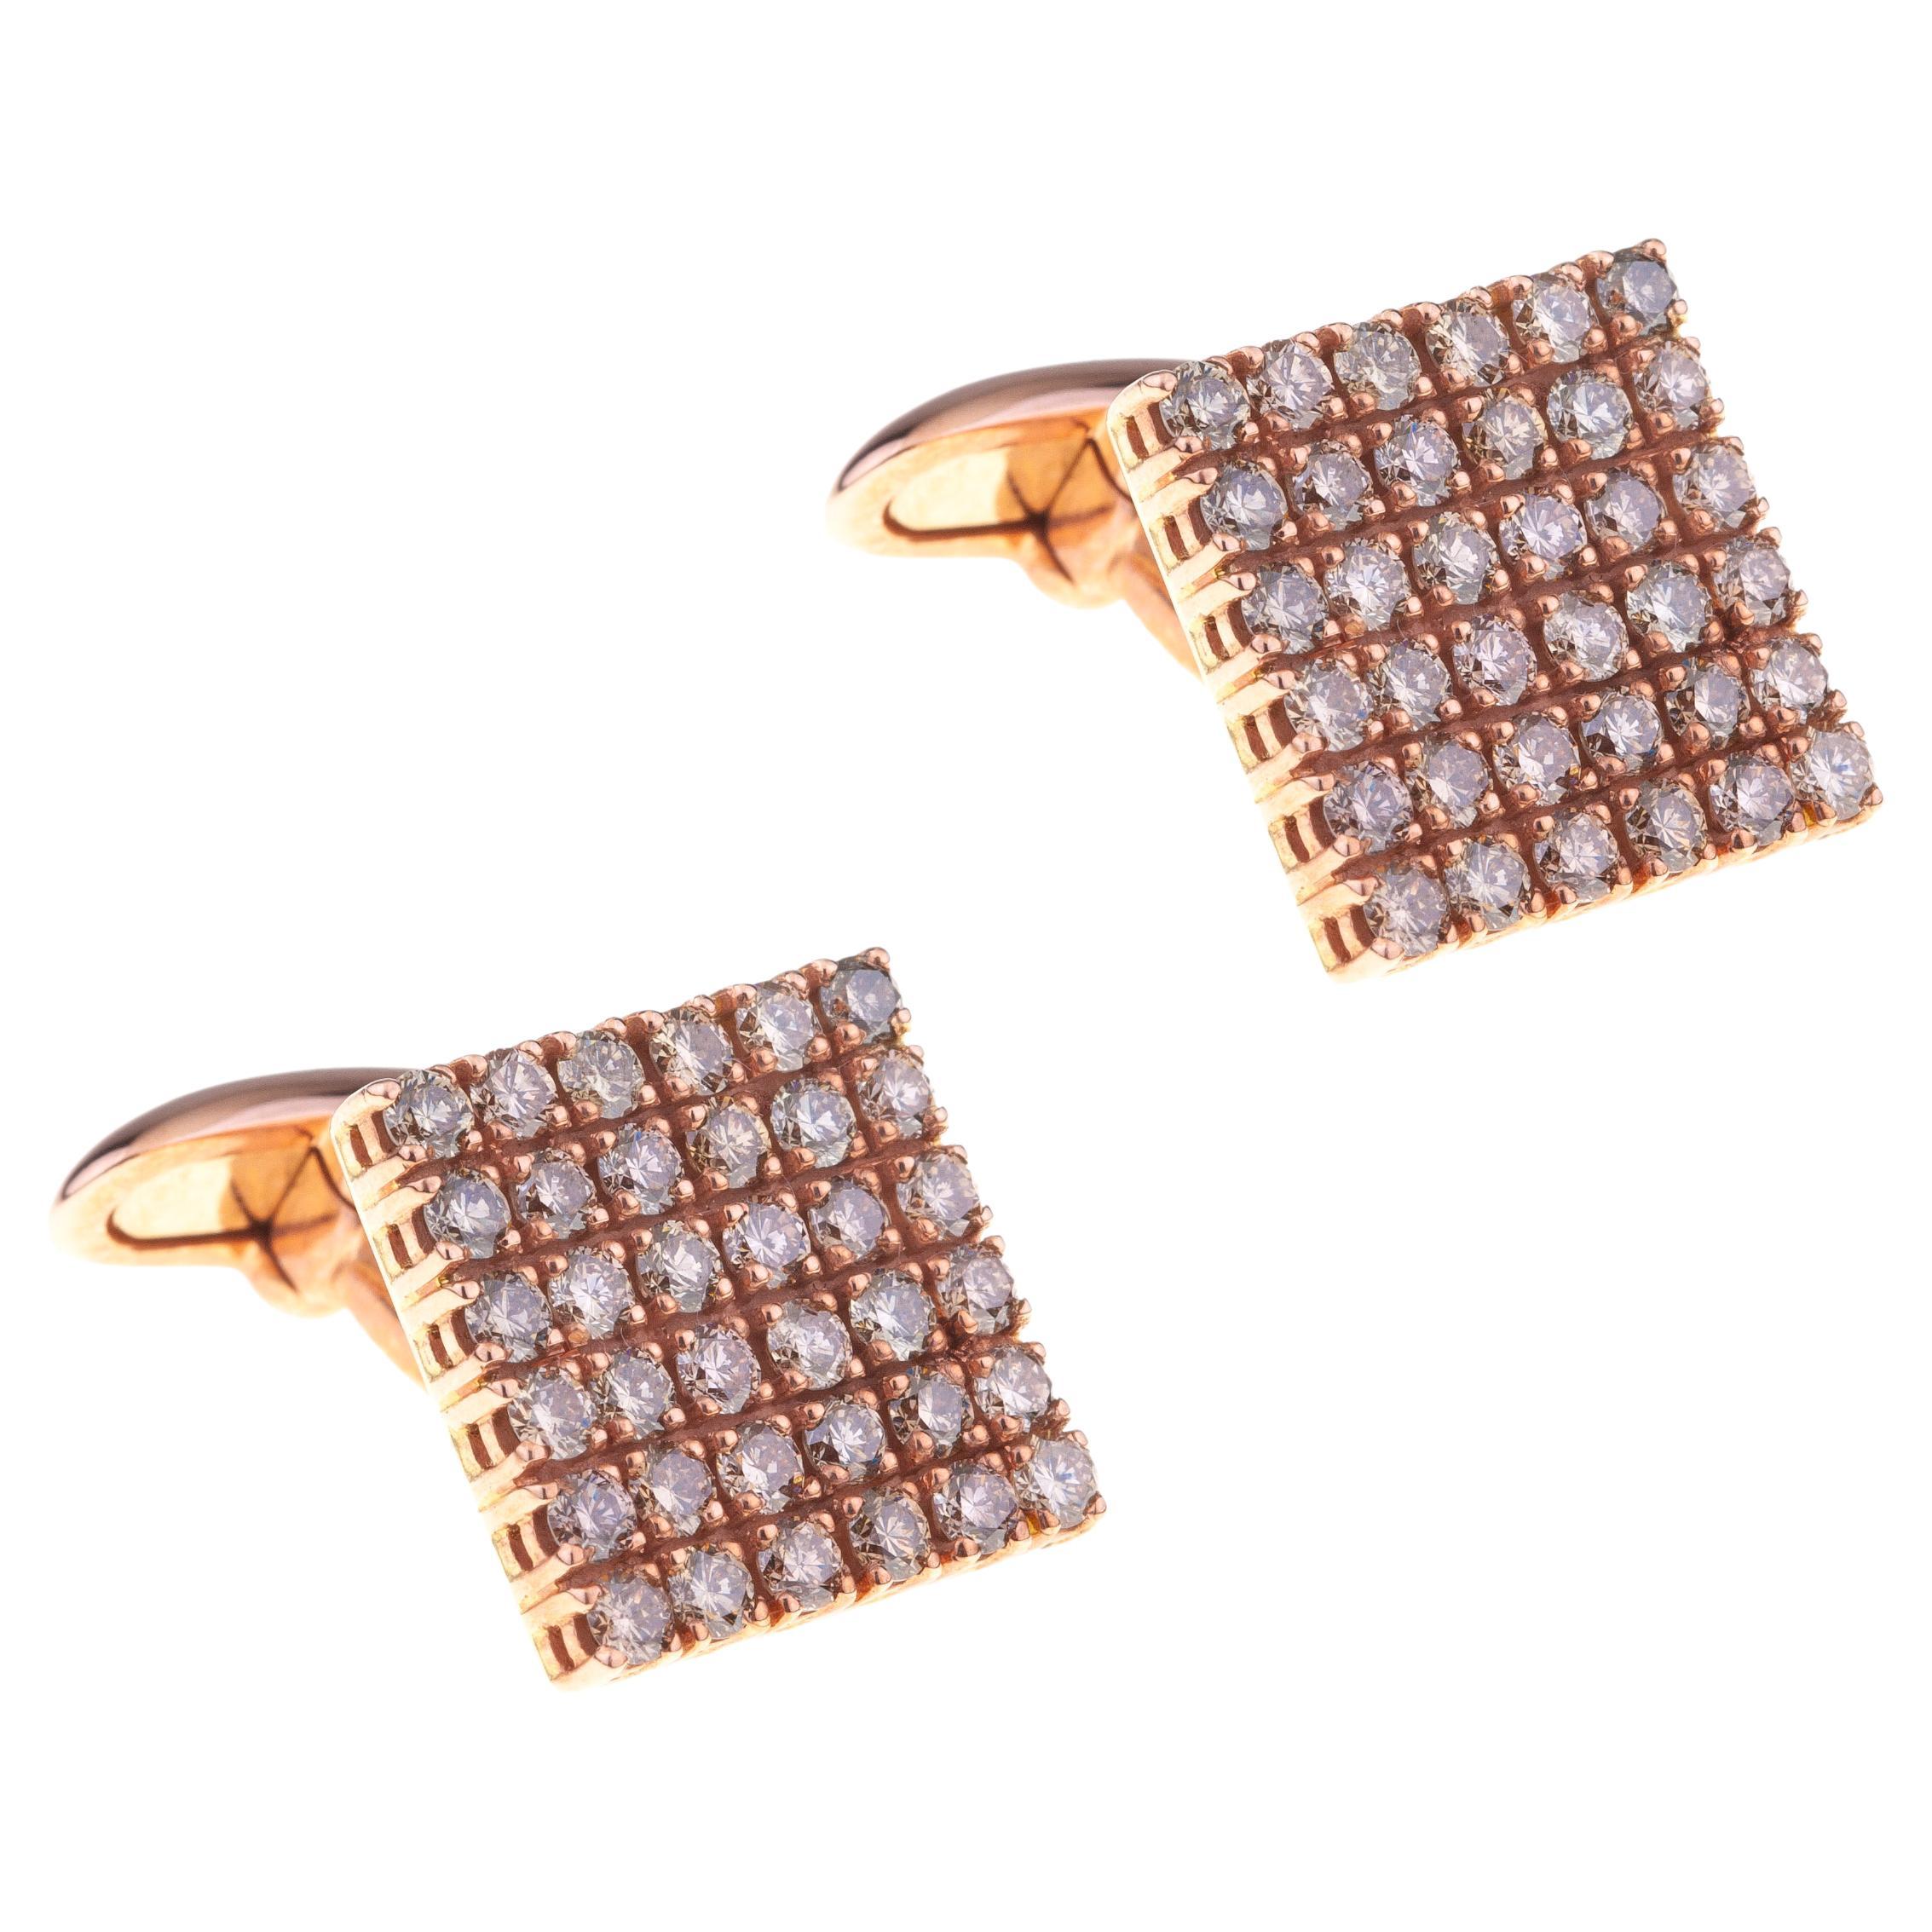 Cufflinks For Men Rose Gold Squared with 36 diamonds each.
Special Cufflinks for Business or Leisure Time to be worn on white, light blue or stripe Cuff Shirts.
The gold square contains 36 brown diamonds per each cufflinks and total weight is ct.